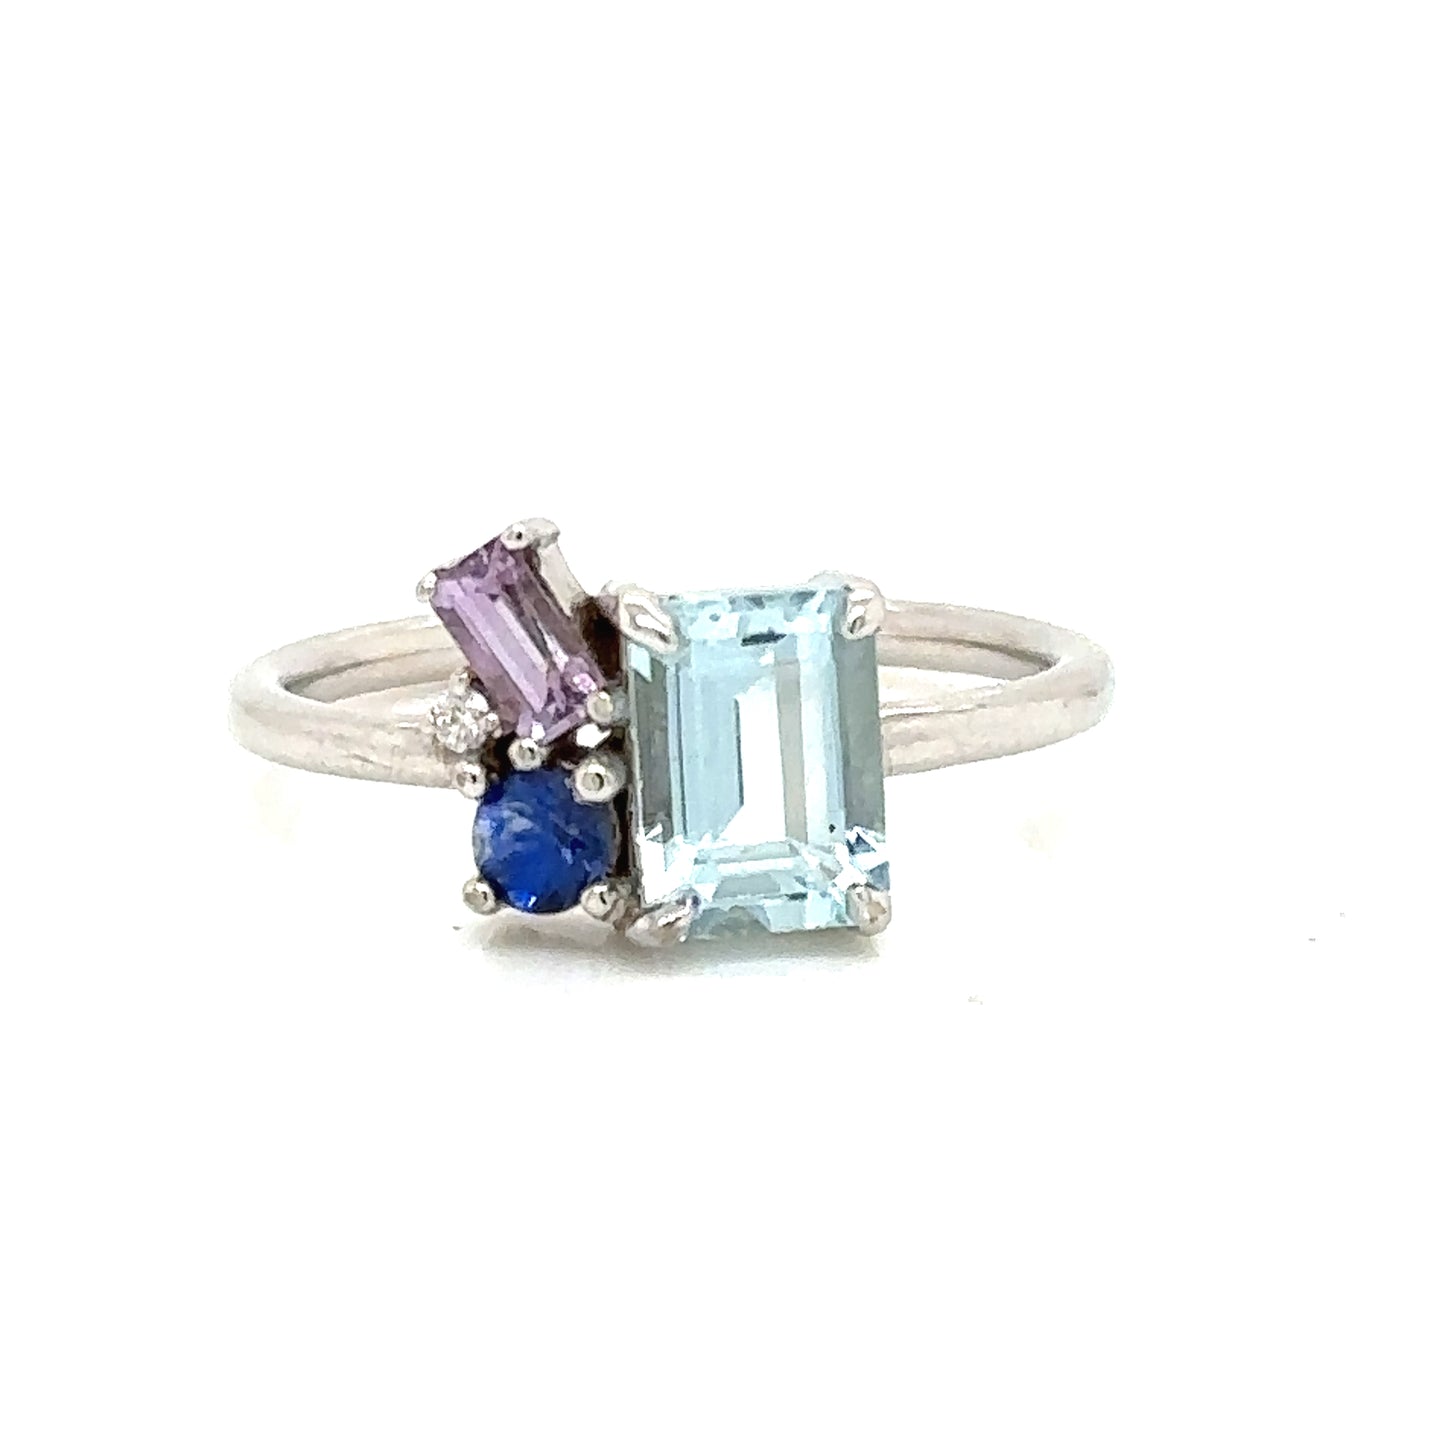 IMMEDIATE DELIVERY / Aquamarine ring with blue sapphire, pink sapphire and diamond / 14k white gold / Size 6